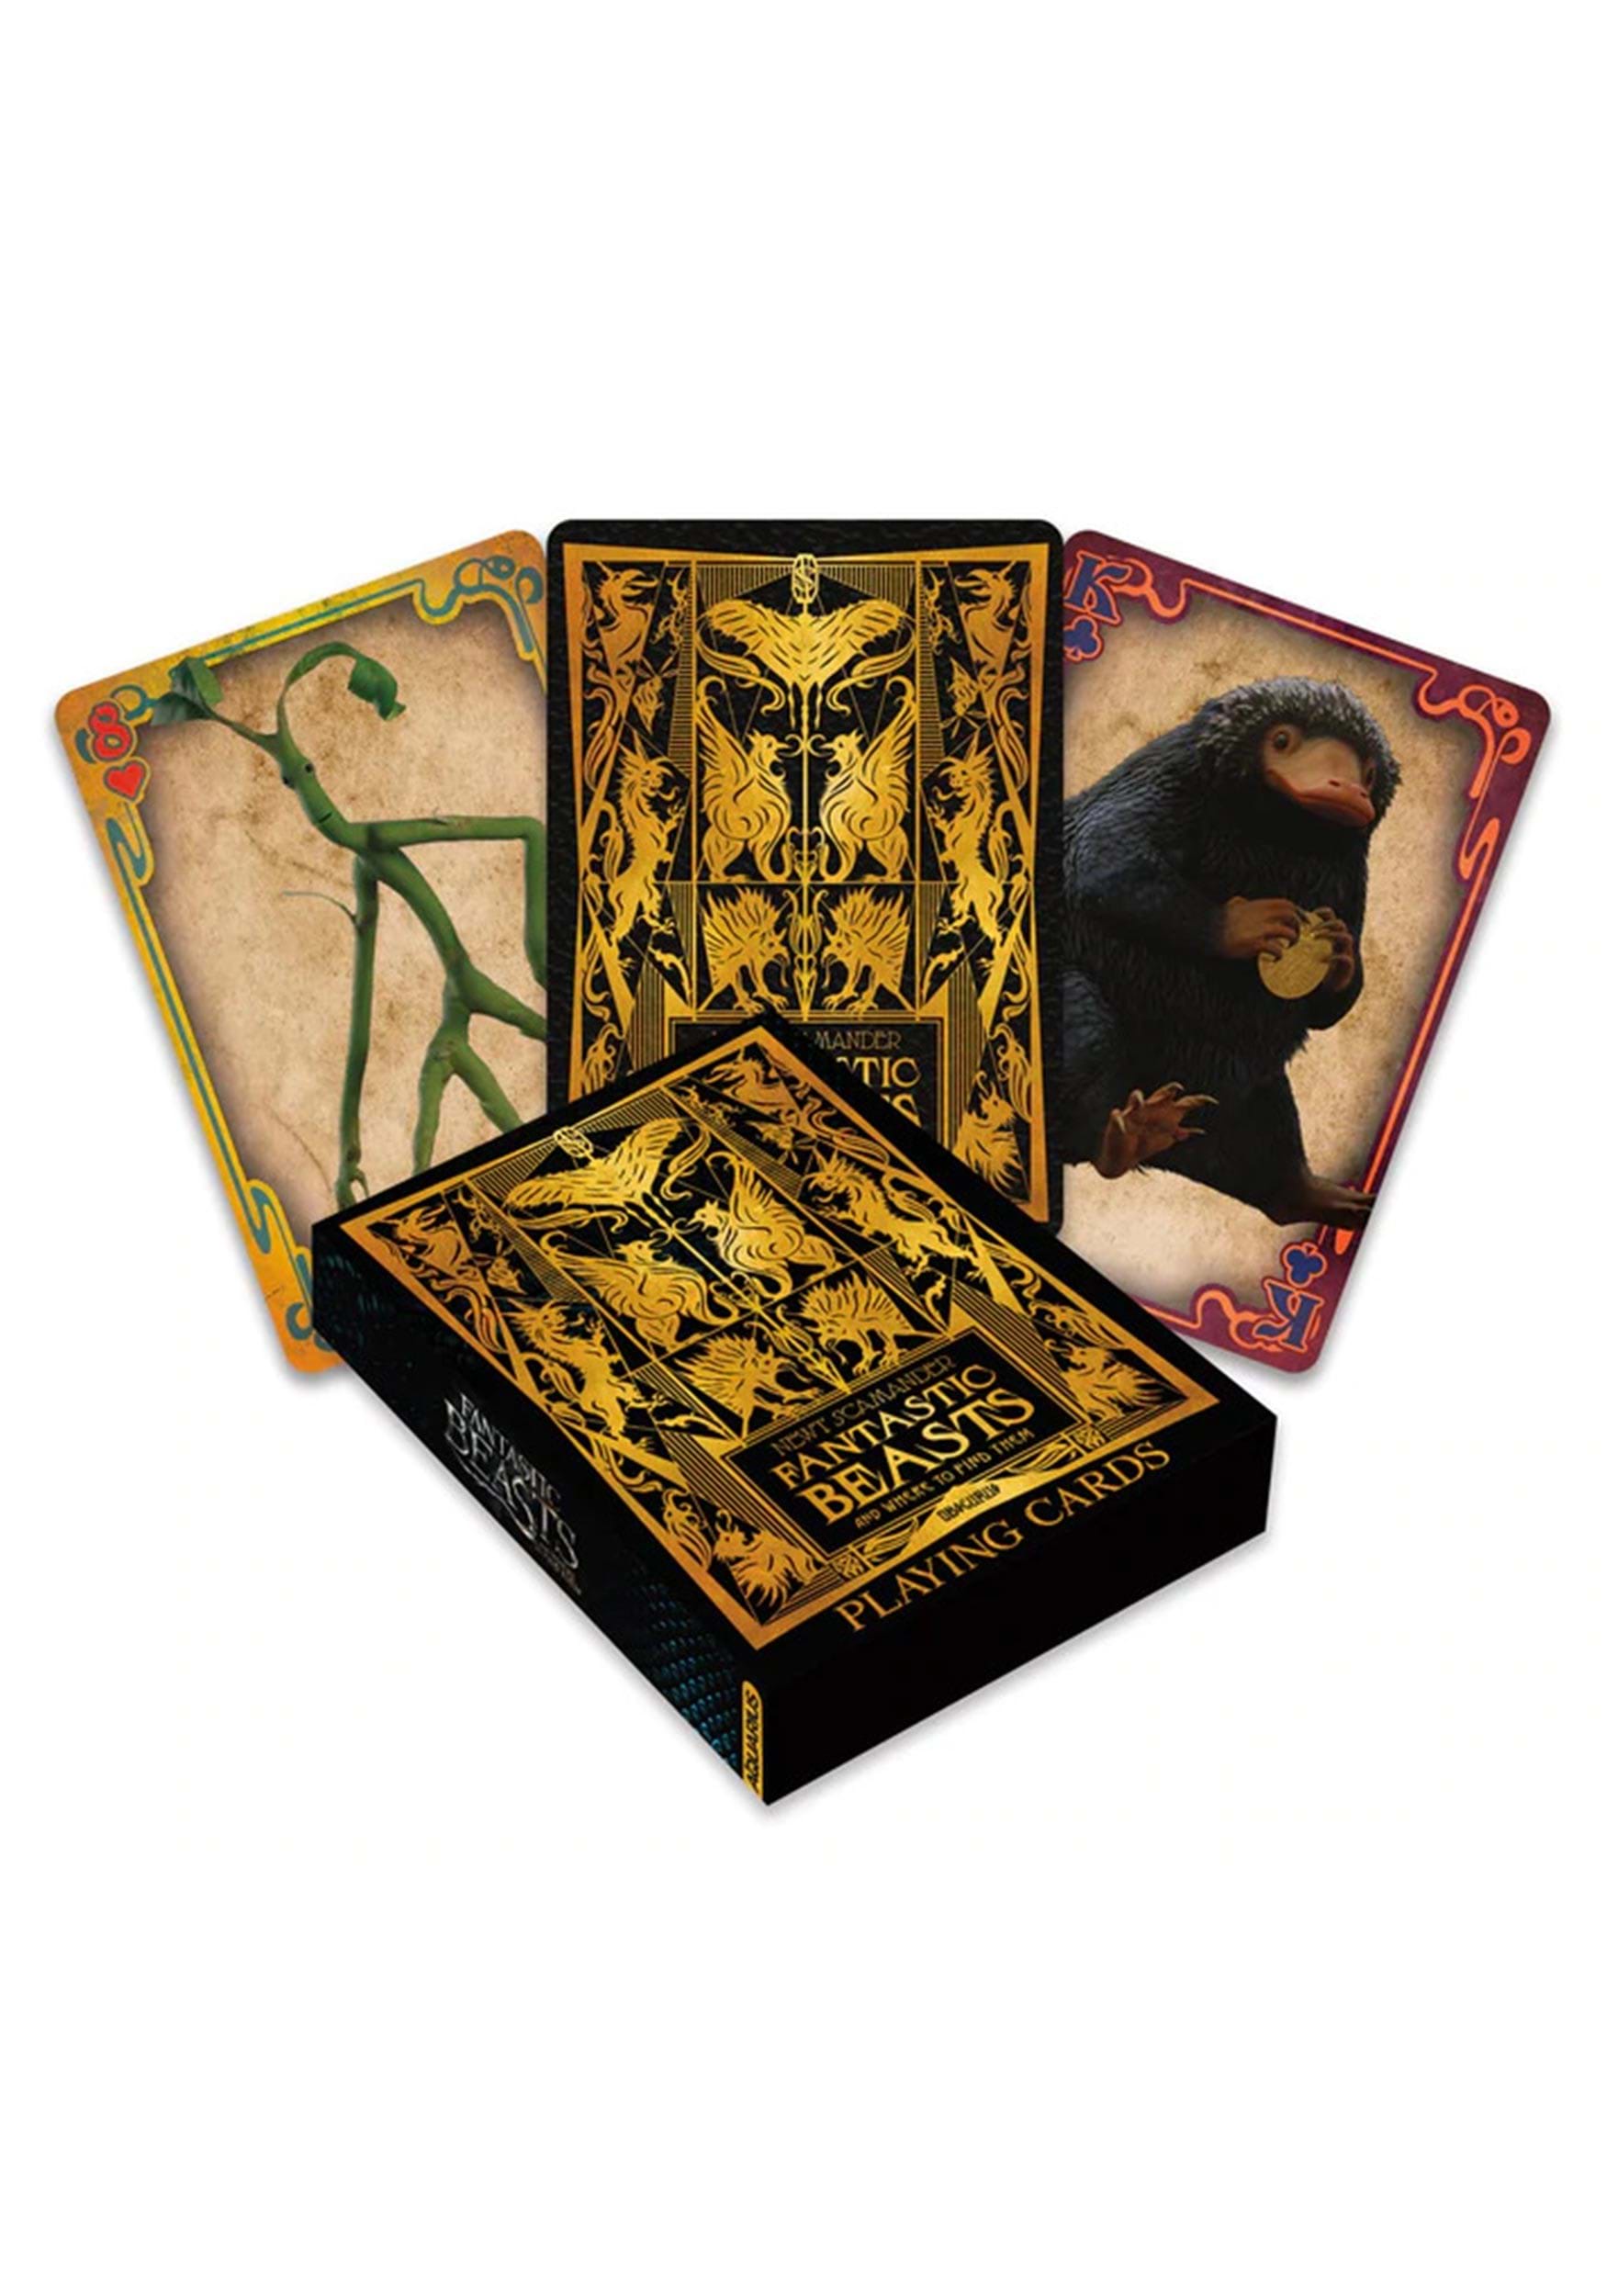 FANTASTIC BEASTS AND WHERE TO FIND THEM PLAYING CARDS OFFICIAL DECK WARNER BROS 